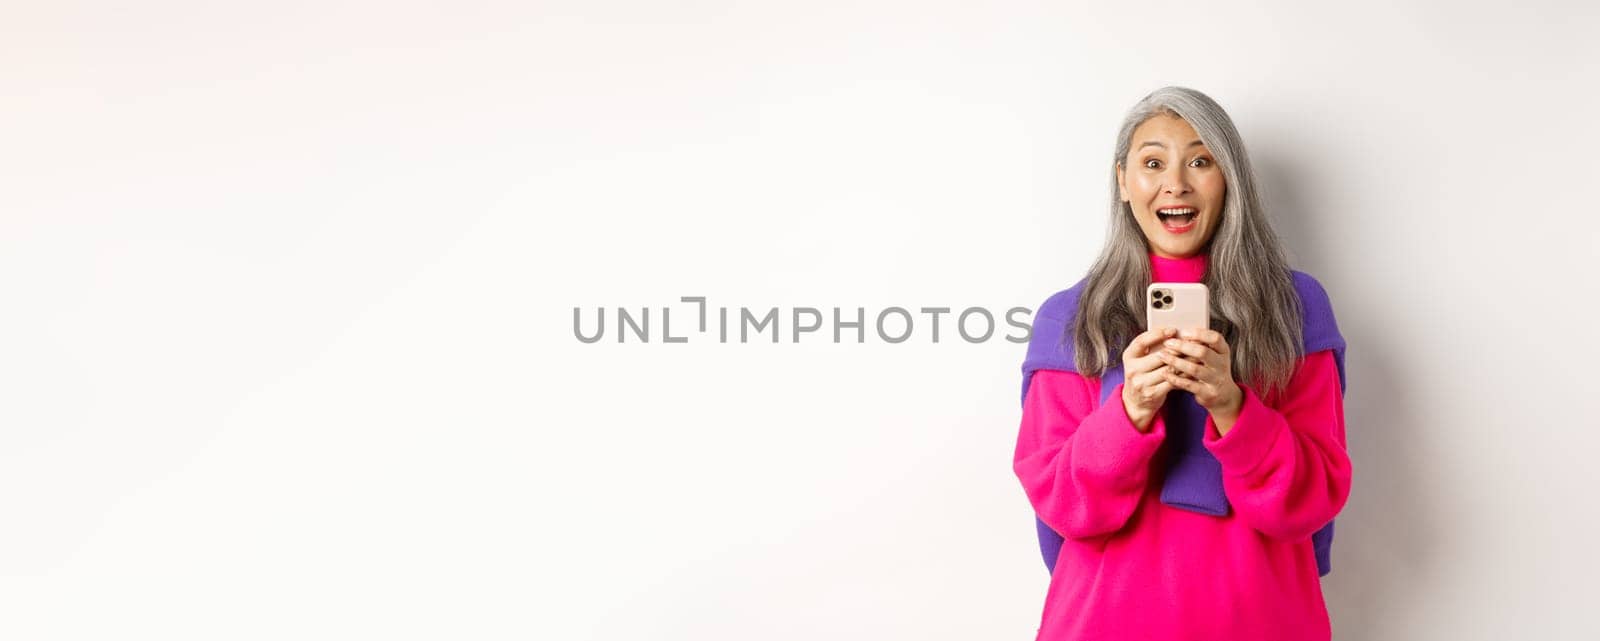 Surprised asian woman smiling at camera after reading promotion on smartphone, standing with mobile phone over white background.